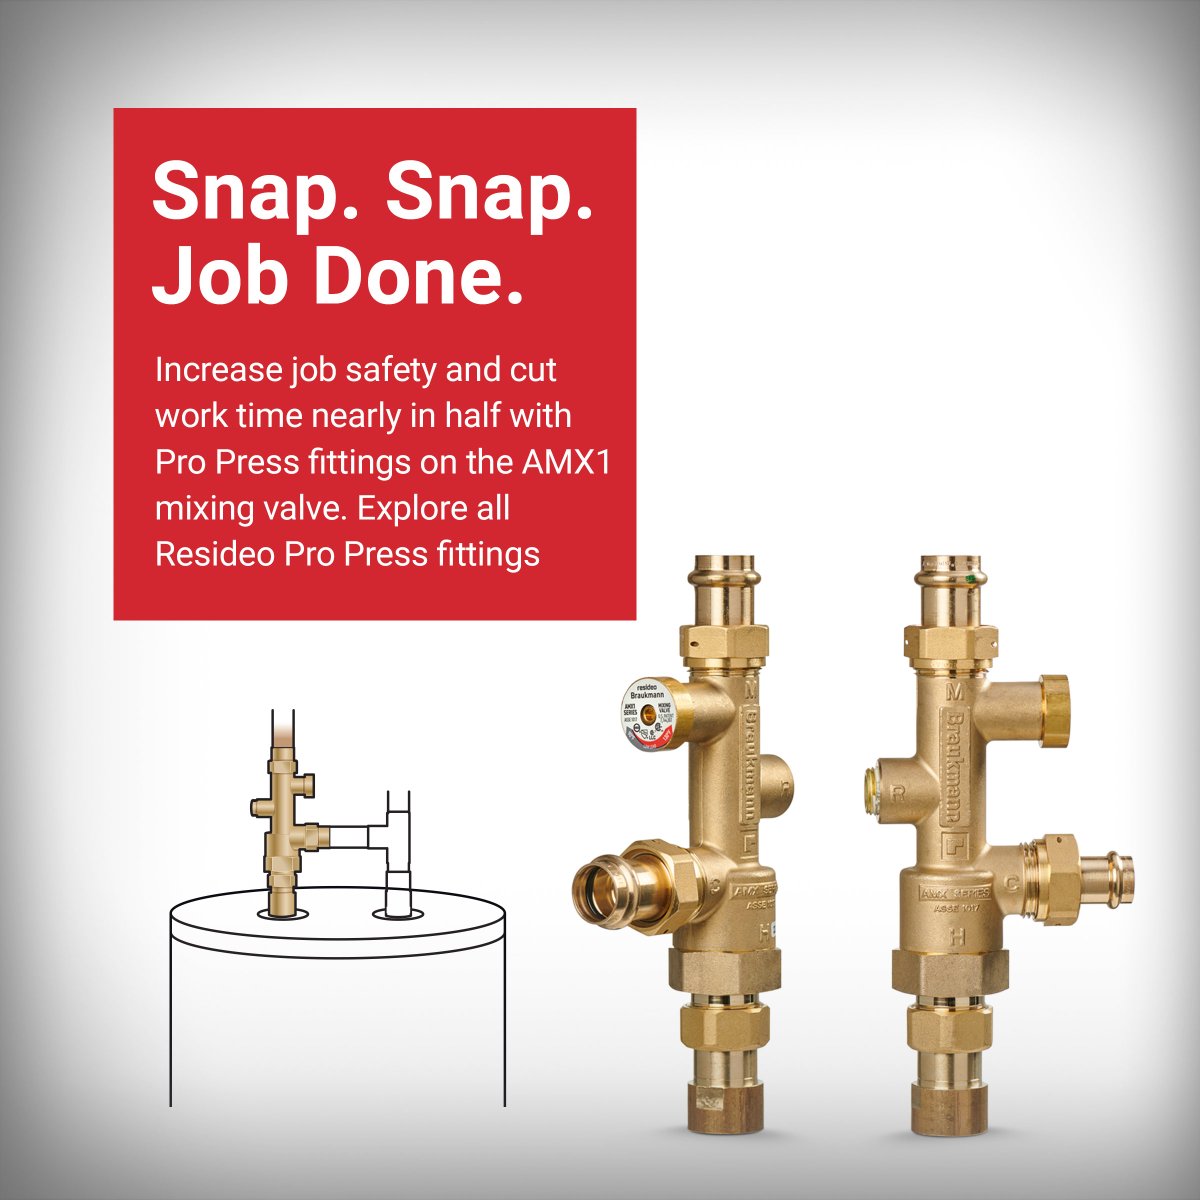 Installation in a Snap The AMX1 mixing valves now come in Pro Press fittings to reduce your installation time and helps reduce parts to keep in stock. Increase job safety and cut your work time nearly in half. Explore AMX Valves. bit.ly/3OjN4V2